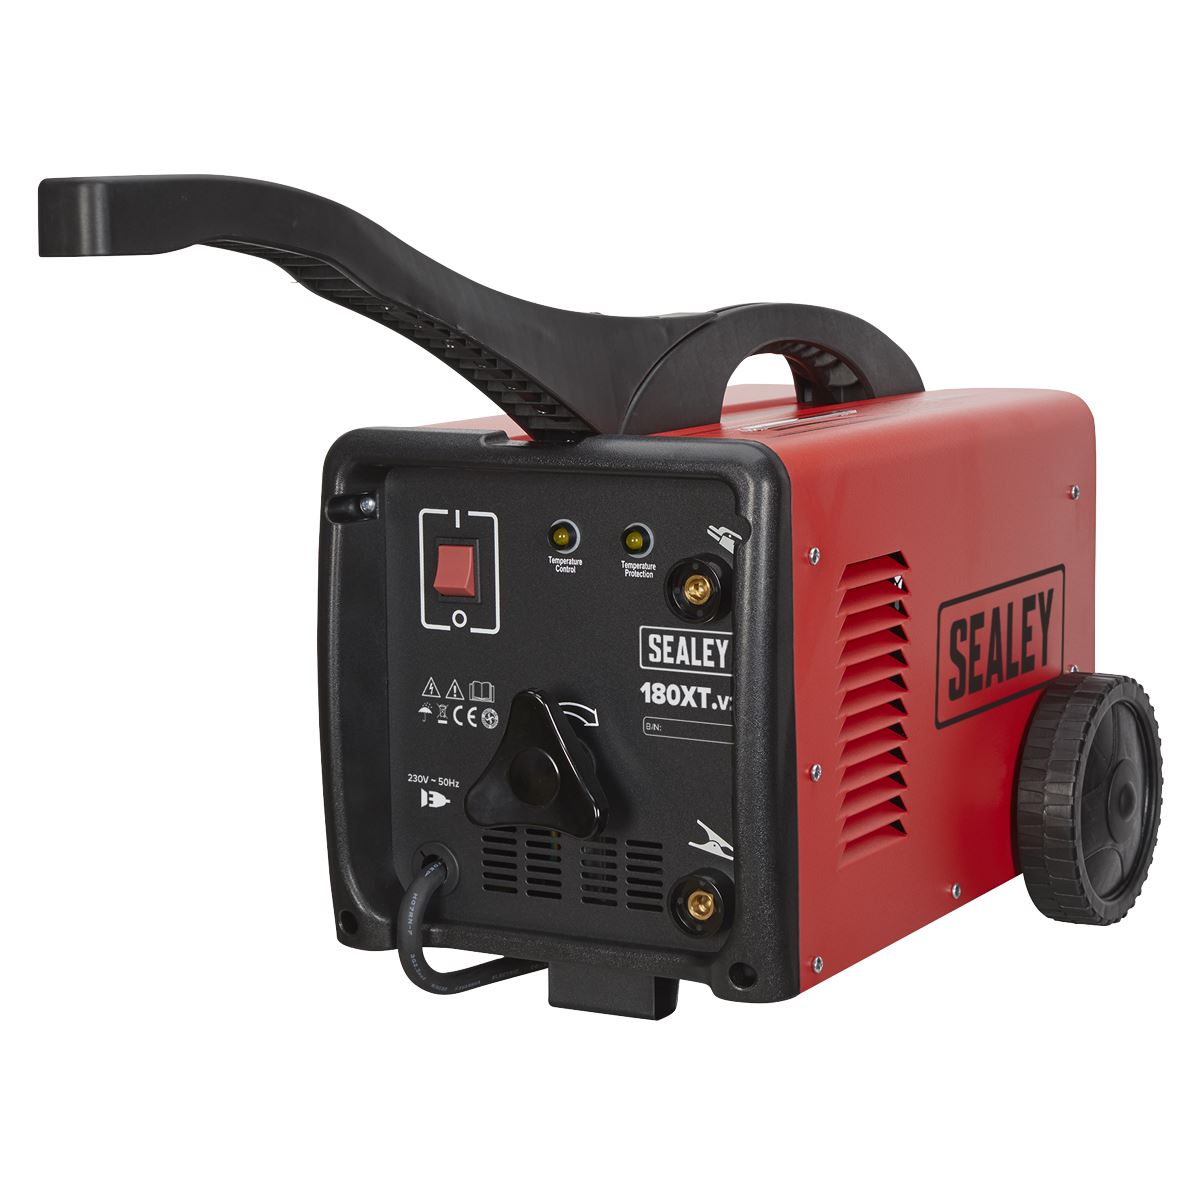 Sealey Arc Welder 180A with Accessory Kit